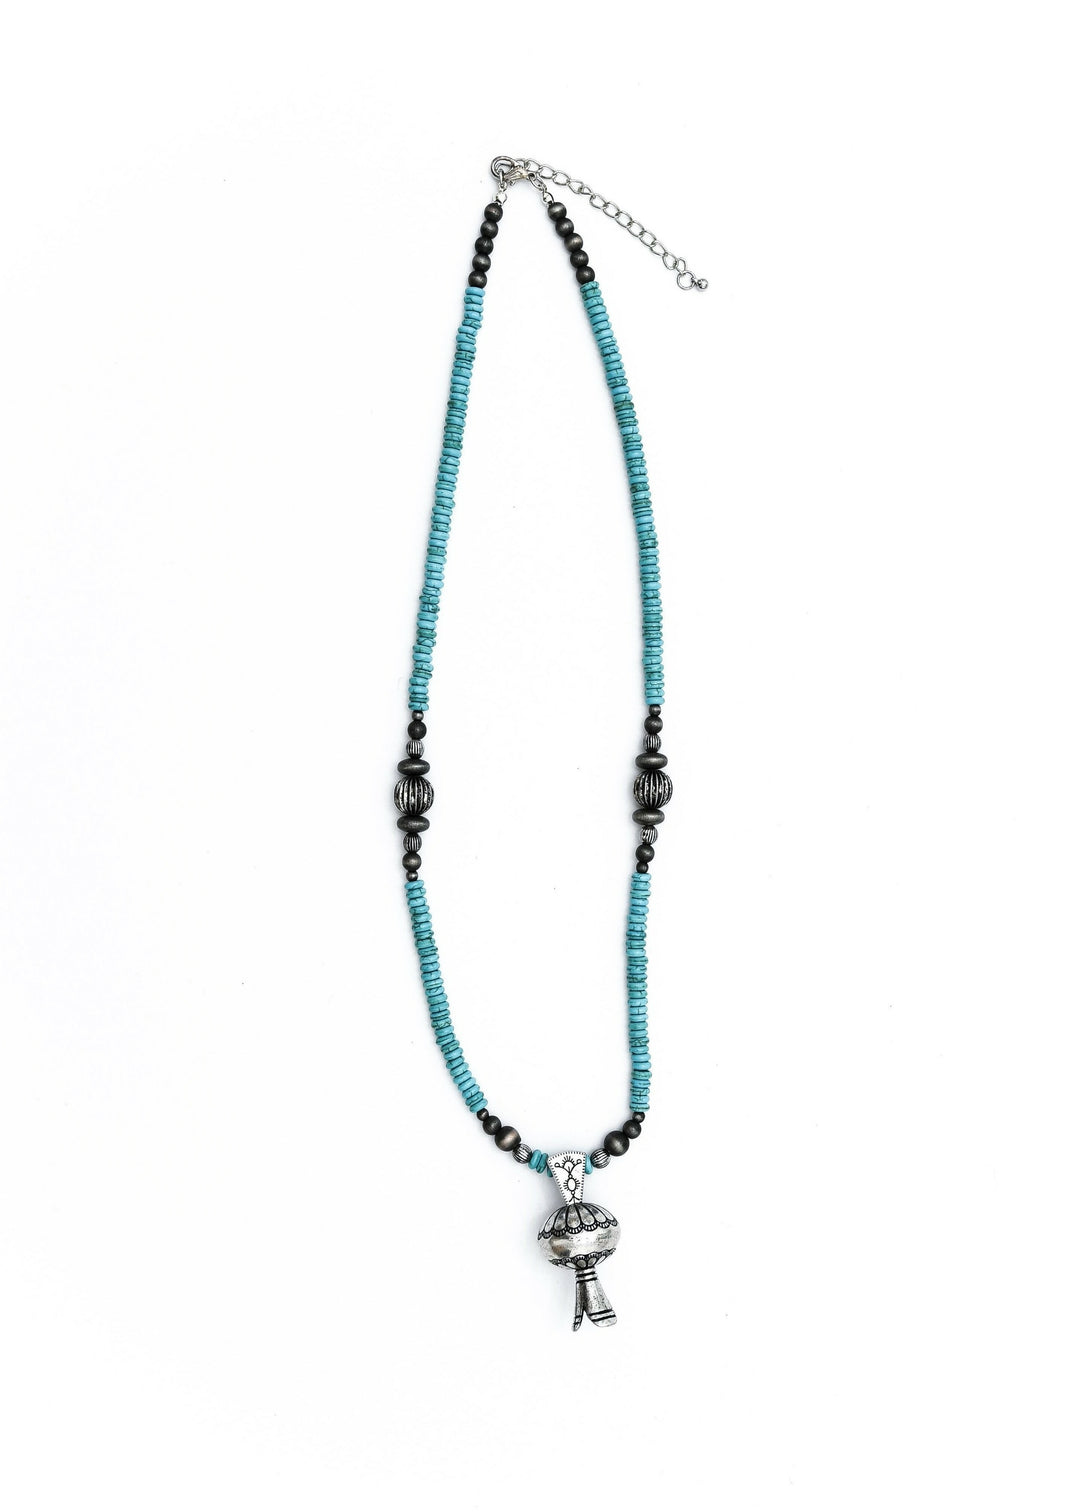 West and Co Turquoise Necklace with Stamped Blossom Pendant